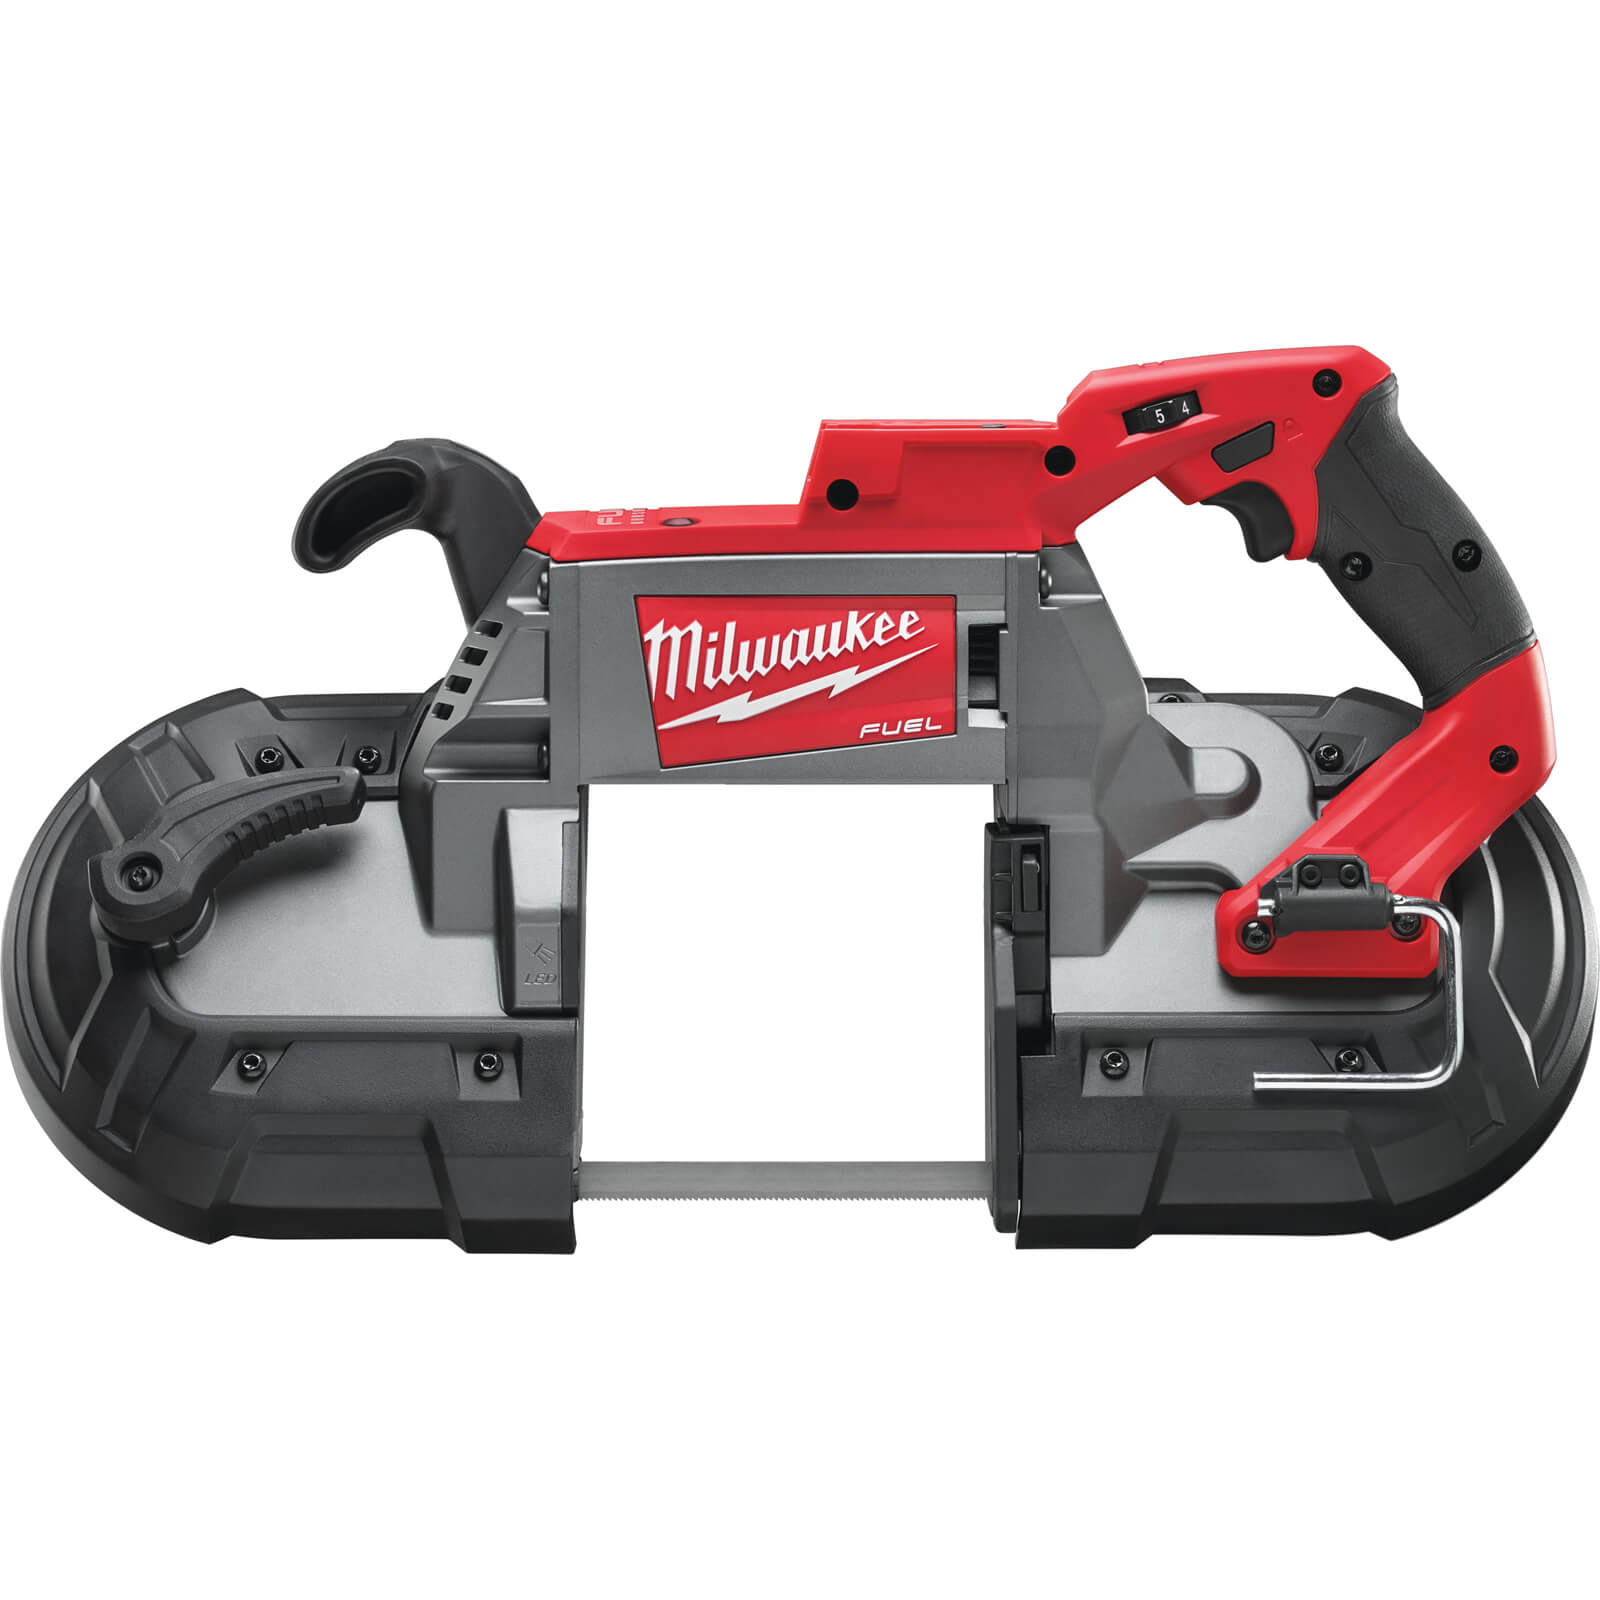 Milwaukee M18 CBS125 Fuel 18v Cordless Brushless Bandsaw No Batteries No Charger No Case